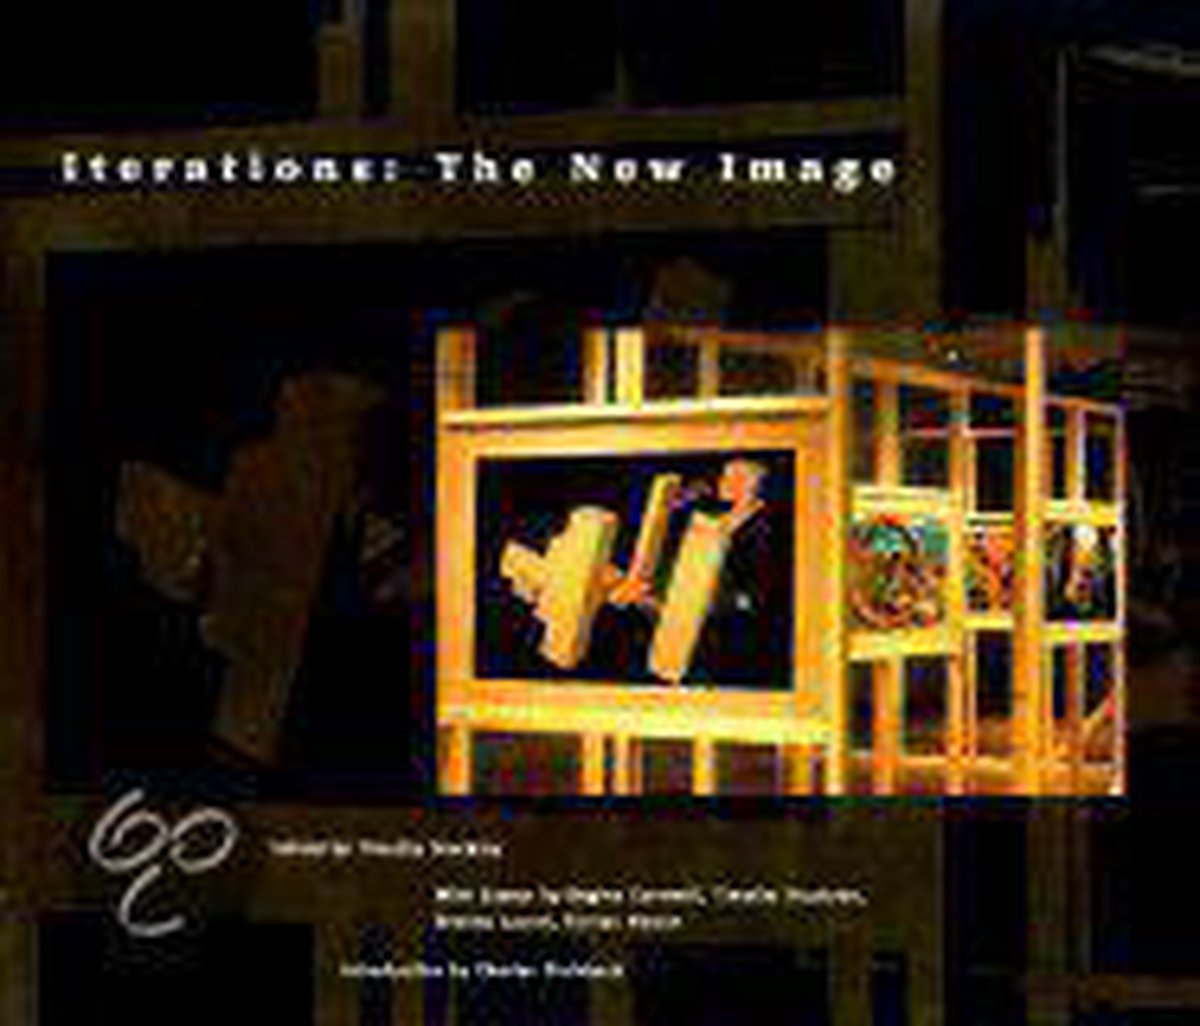 Iterations - The New Image